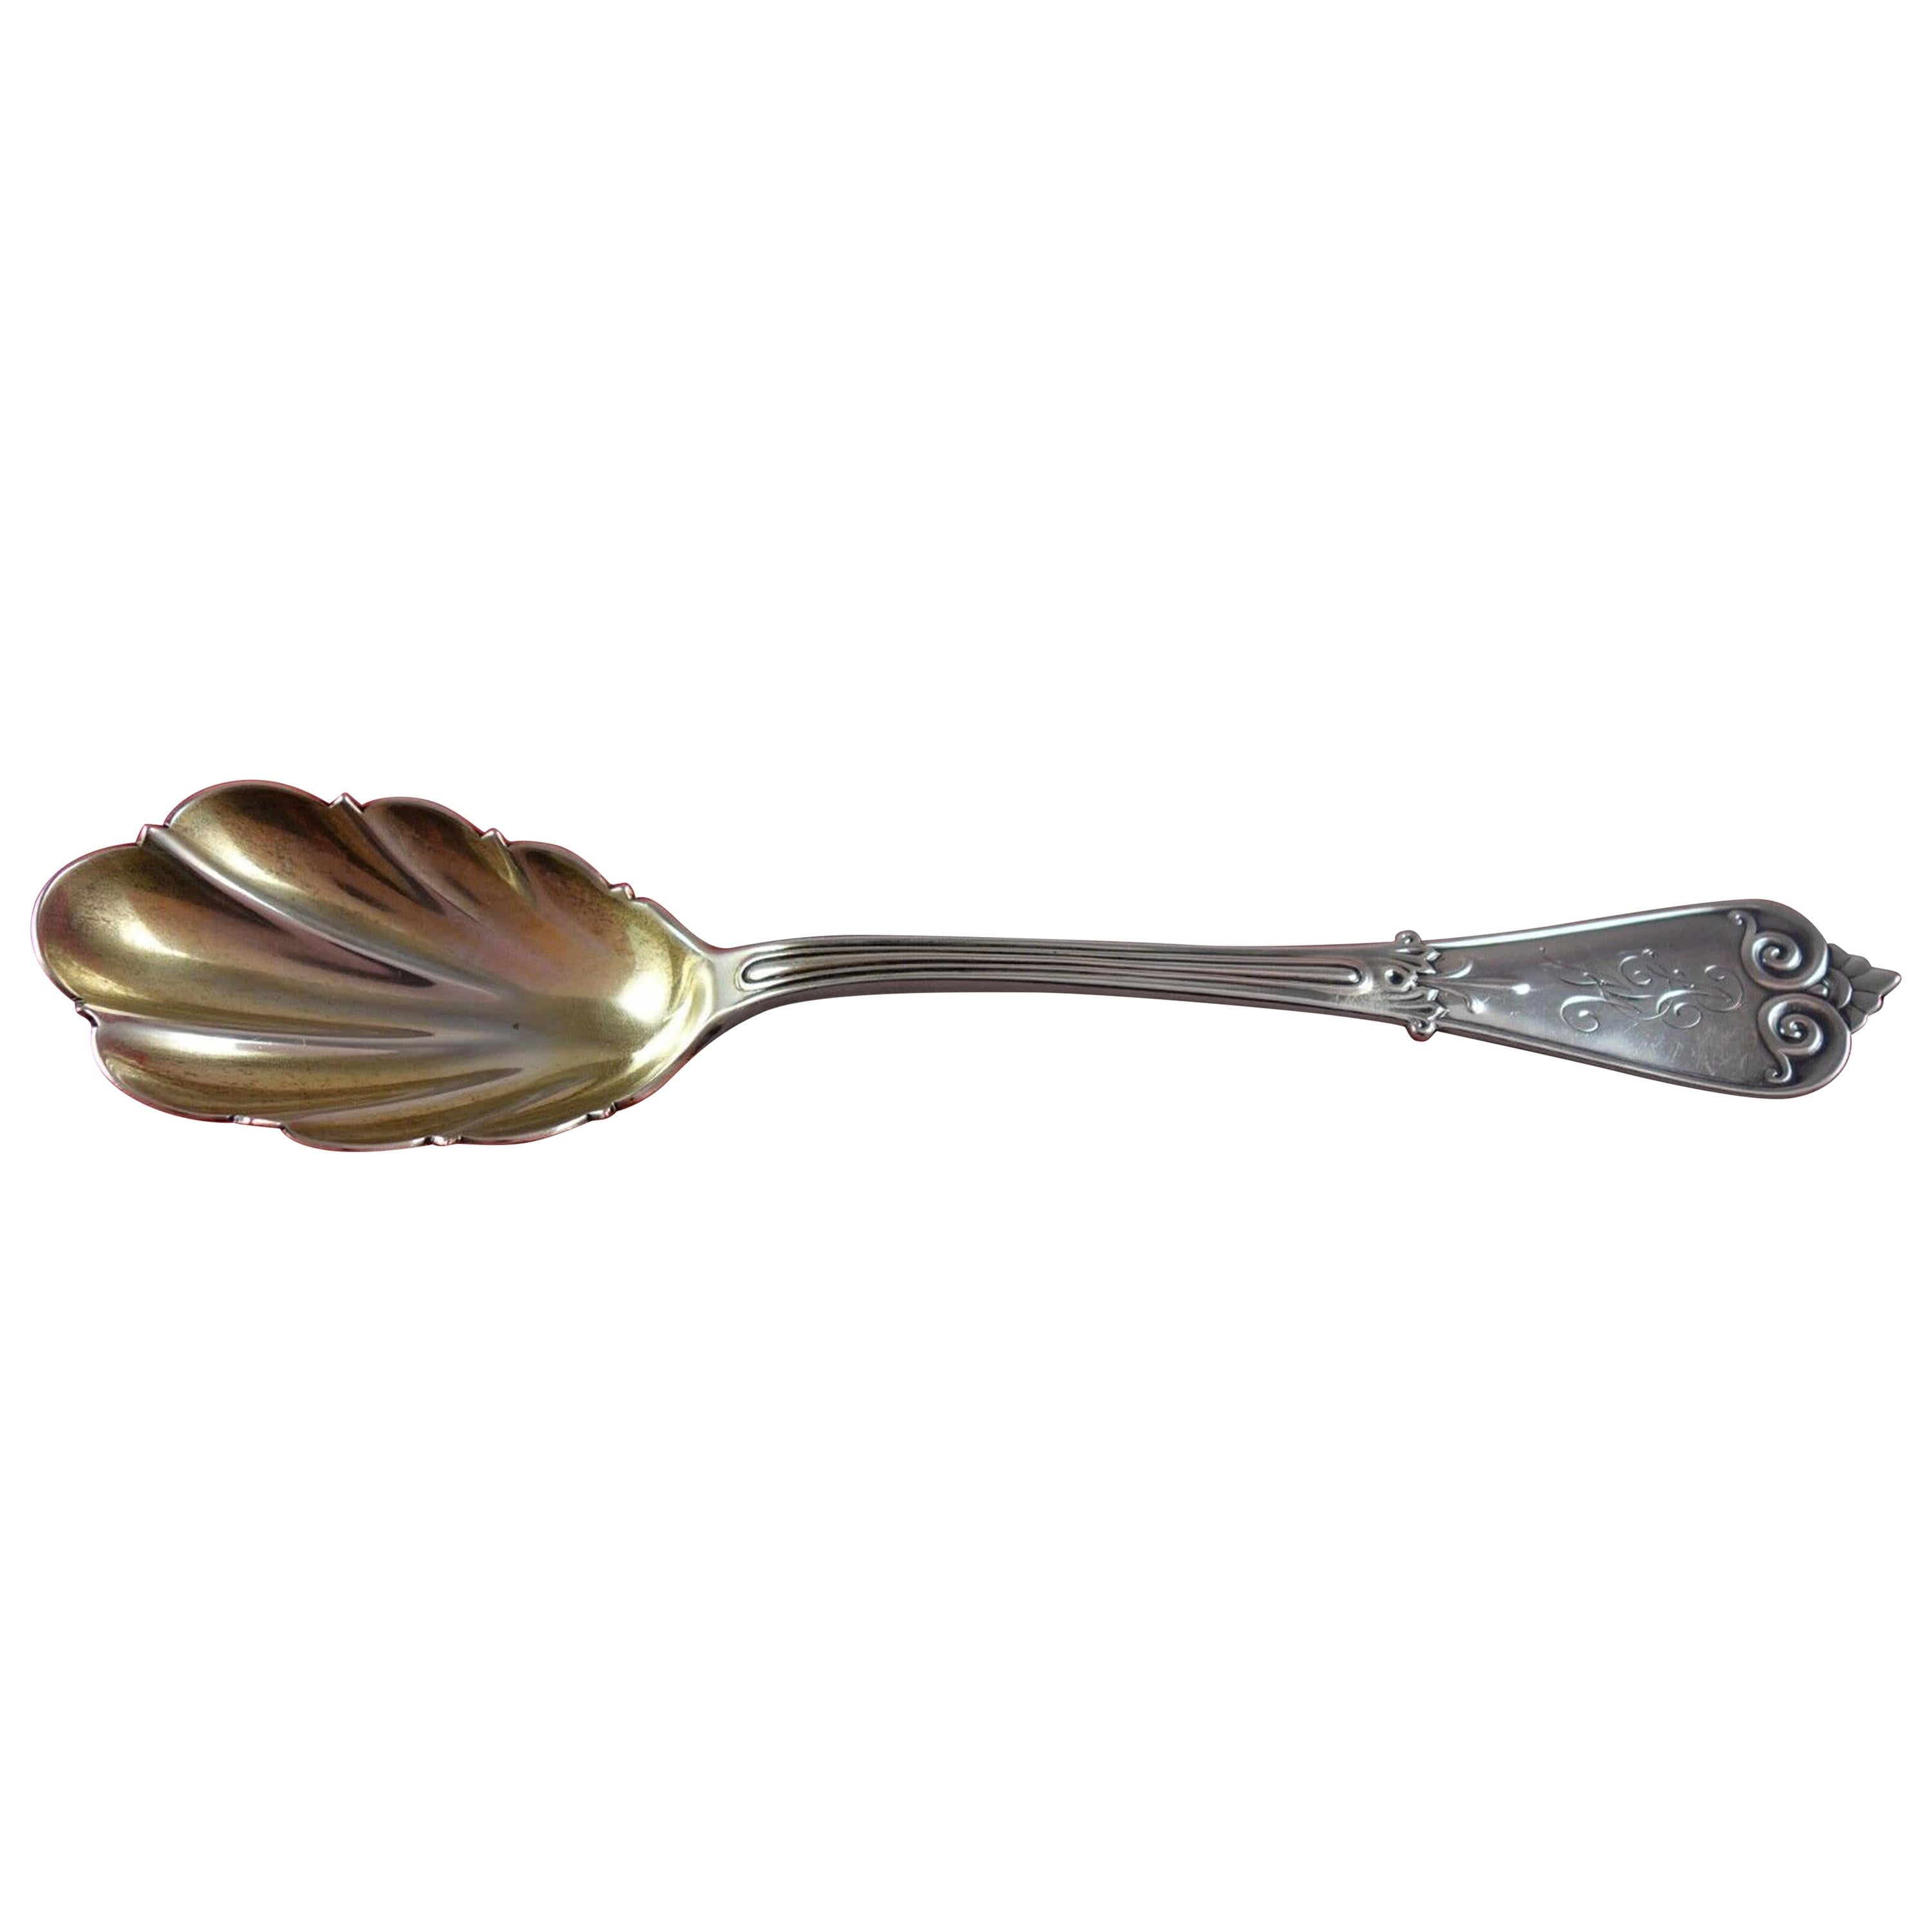 Beekman by Tiffany & Co. Sterling Silver Preserve Spoon Gold Washed